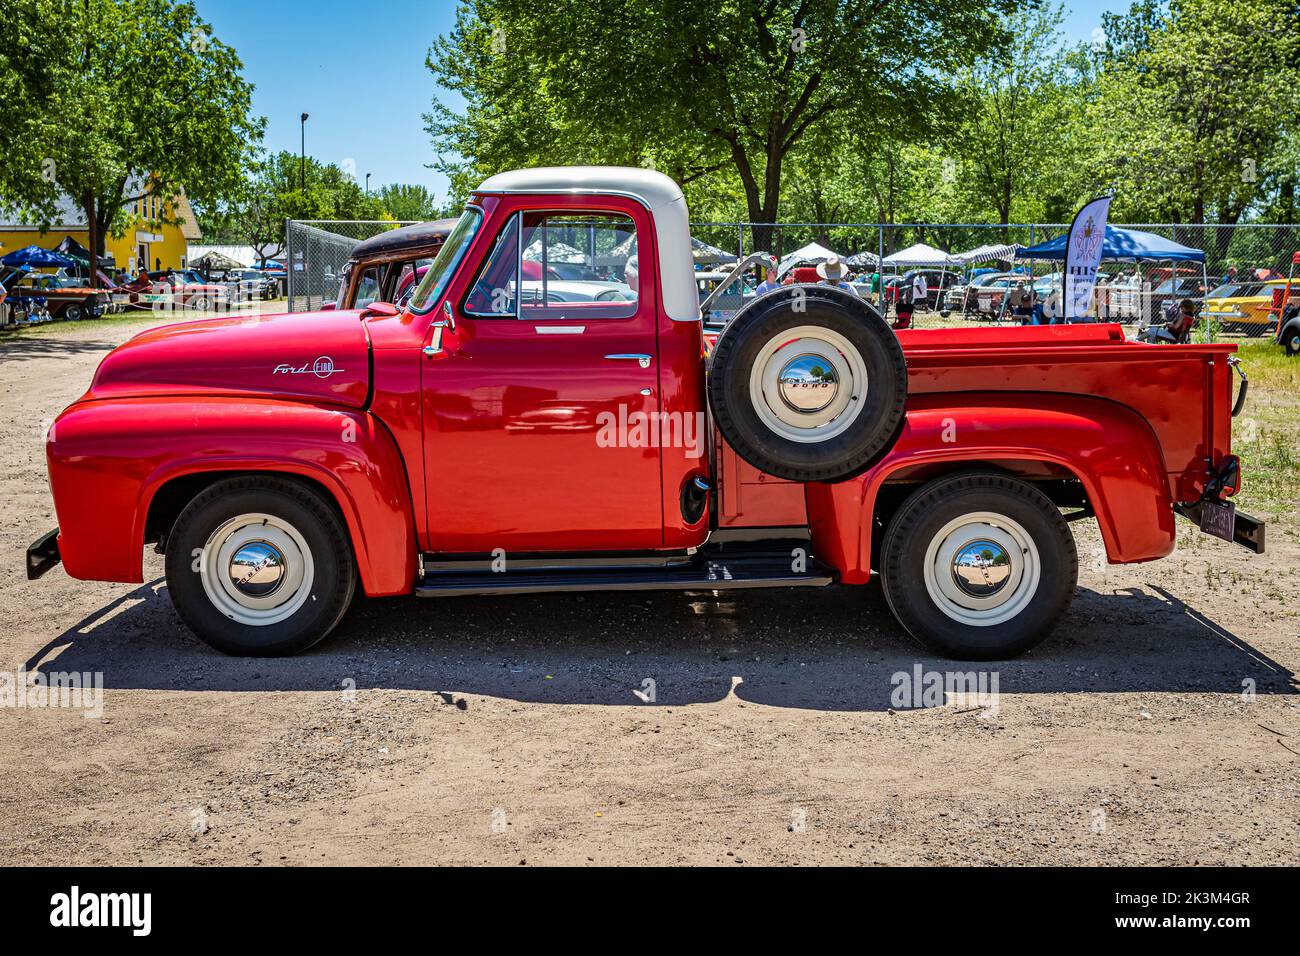 Falcon Heights, MN - June 18, 2022: High perspective side view of a 1955 Ford F100 Pickup Truck at a local car show. Stock Photo